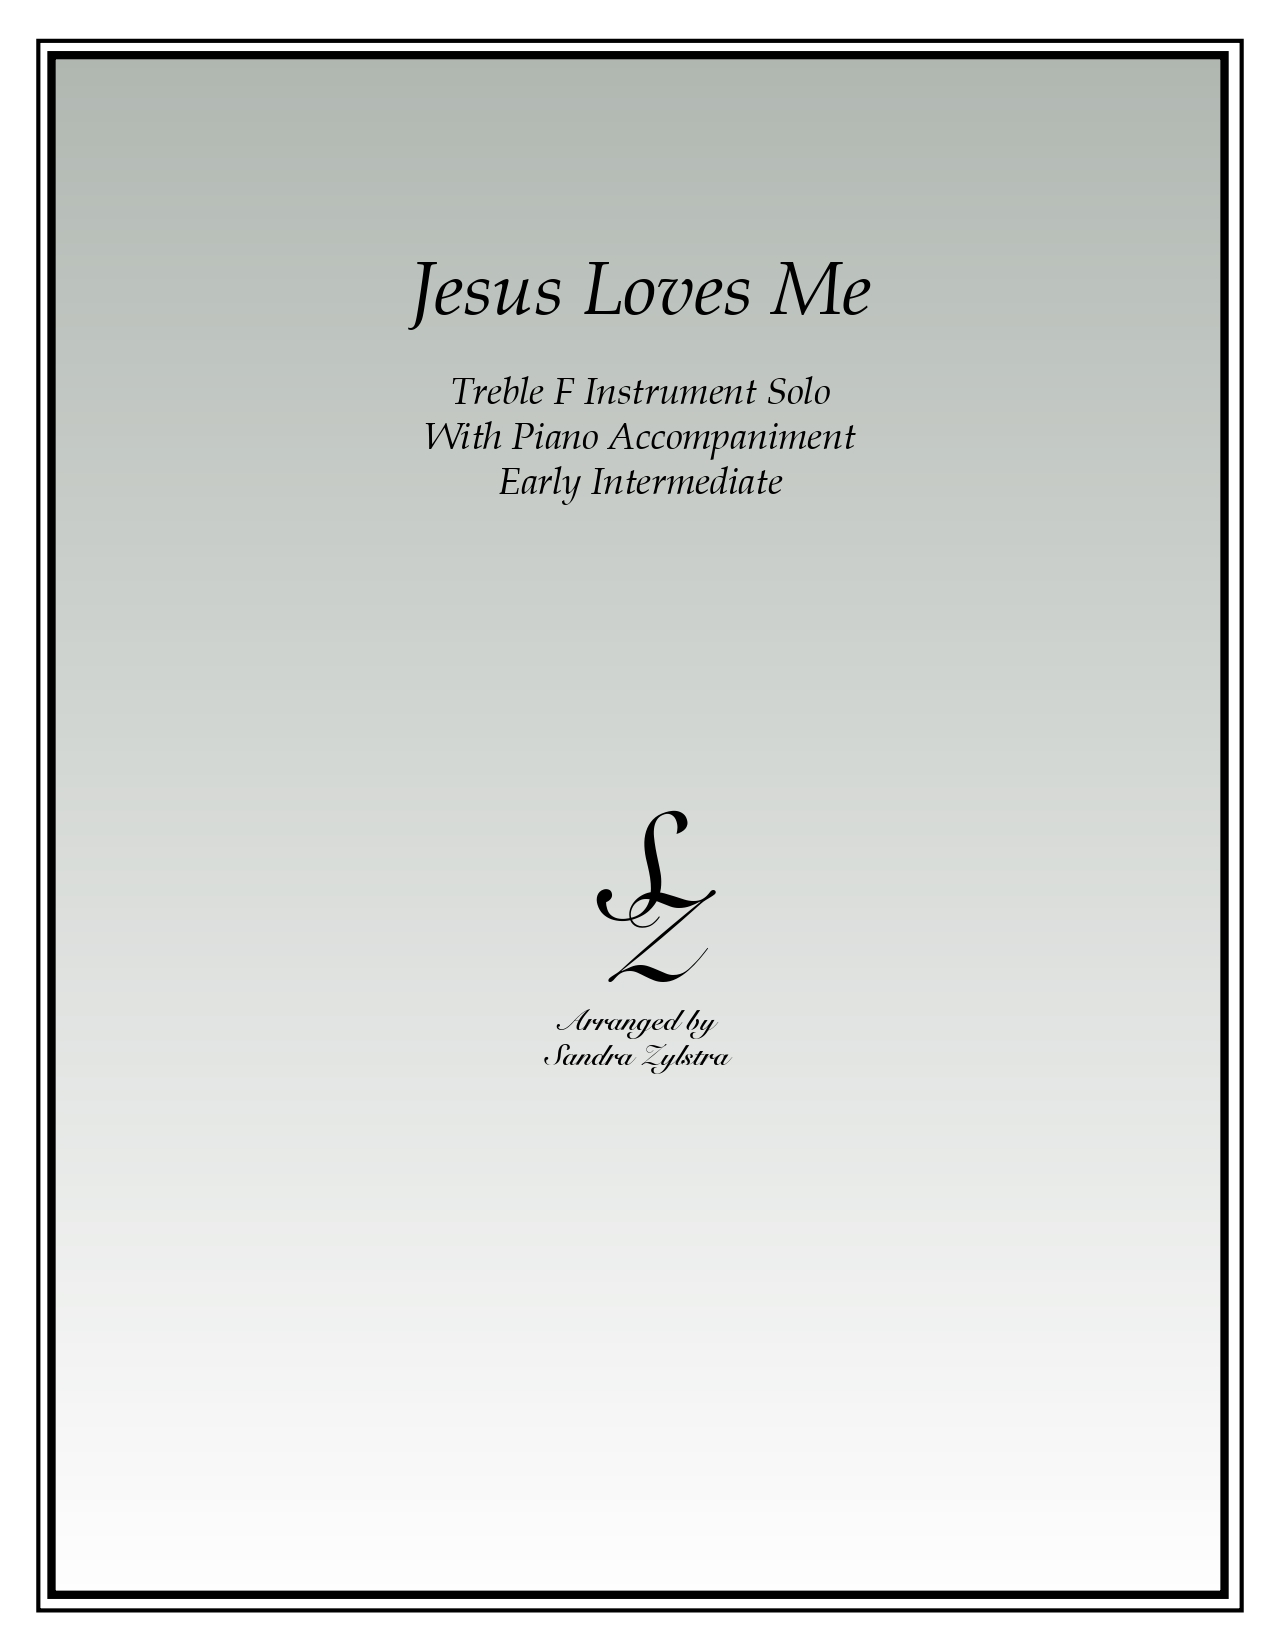 Jesus Loves Me F instrument solo part cover page 00011